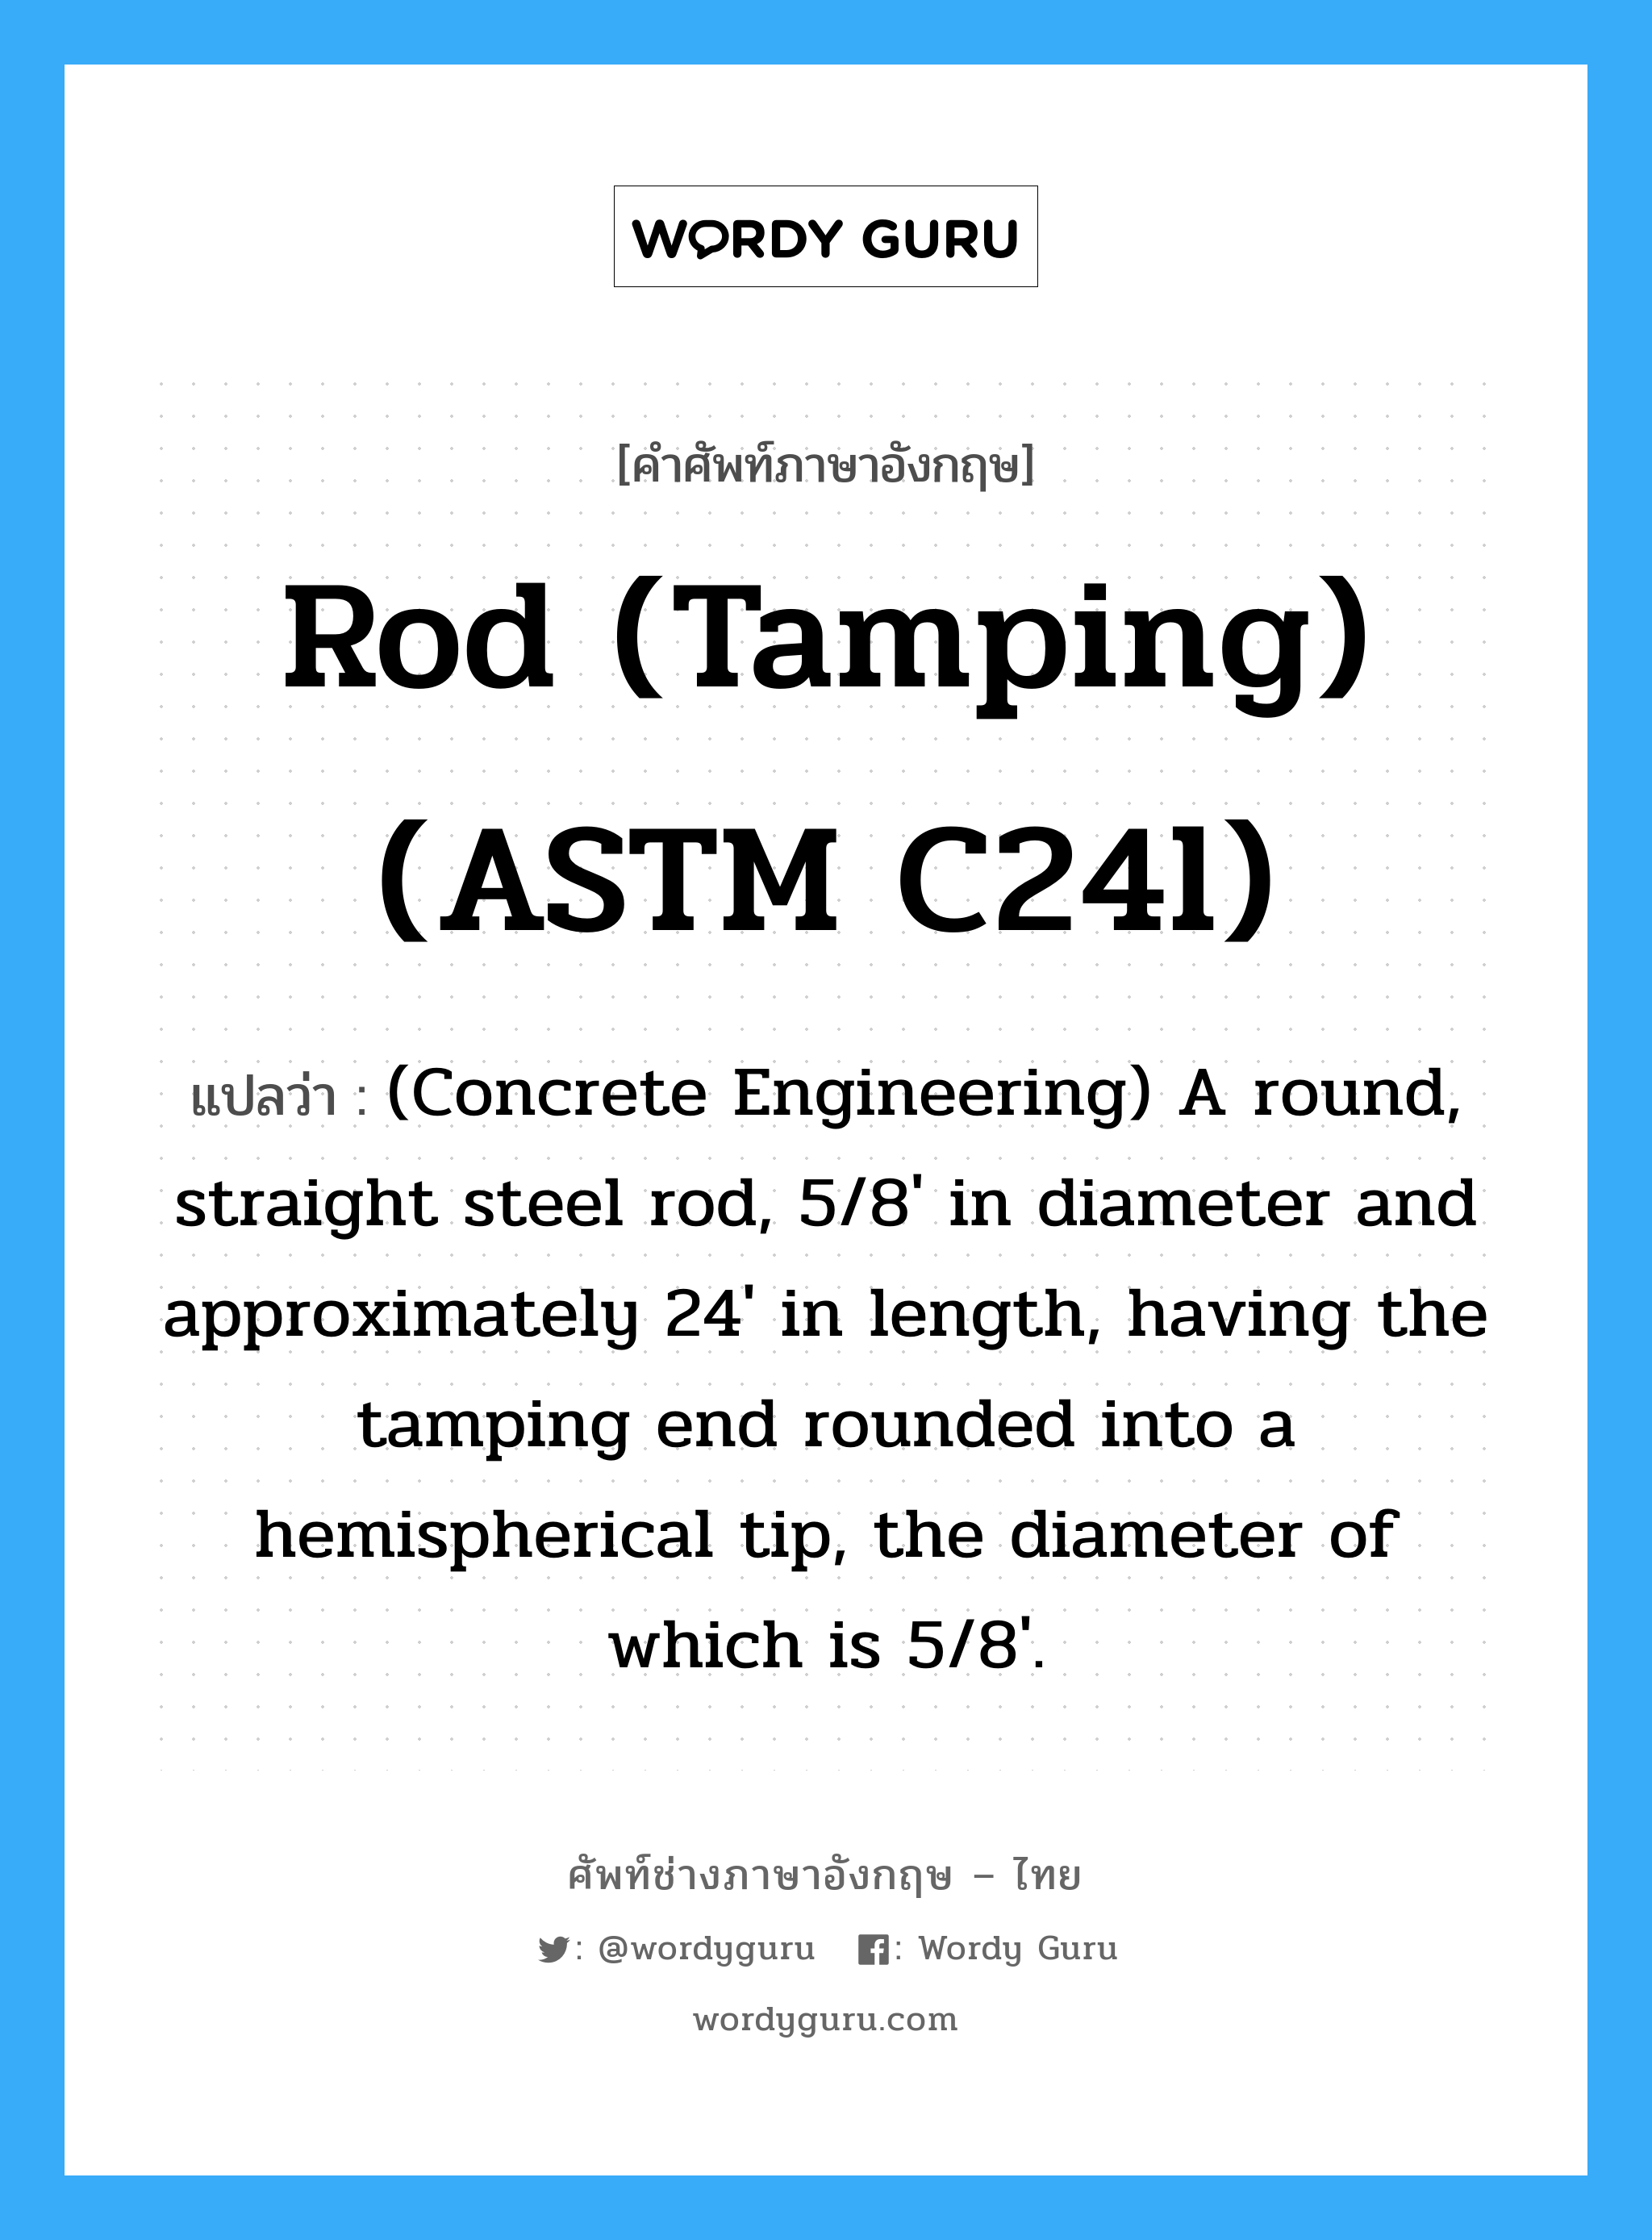 (Concrete Engineering) A round, straight steel rod, 5/8' in diameter and approximately 24' in length, having the tamping end rounded into a hemispherical tip, the diameter of which is 5/8'. ภาษาอังกฤษ?, คำศัพท์ช่างภาษาอังกฤษ - ไทย (Concrete Engineering) A round, straight steel rod, 5/8' in diameter and approximately 24' in length, having the tamping end rounded into a hemispherical tip, the diameter of which is 5/8'. คำศัพท์ภาษาอังกฤษ (Concrete Engineering) A round, straight steel rod, 5/8' in diameter and approximately 24' in length, having the tamping end rounded into a hemispherical tip, the diameter of which is 5/8'. แปลว่า Rod (tamping) (ASTM C24l)